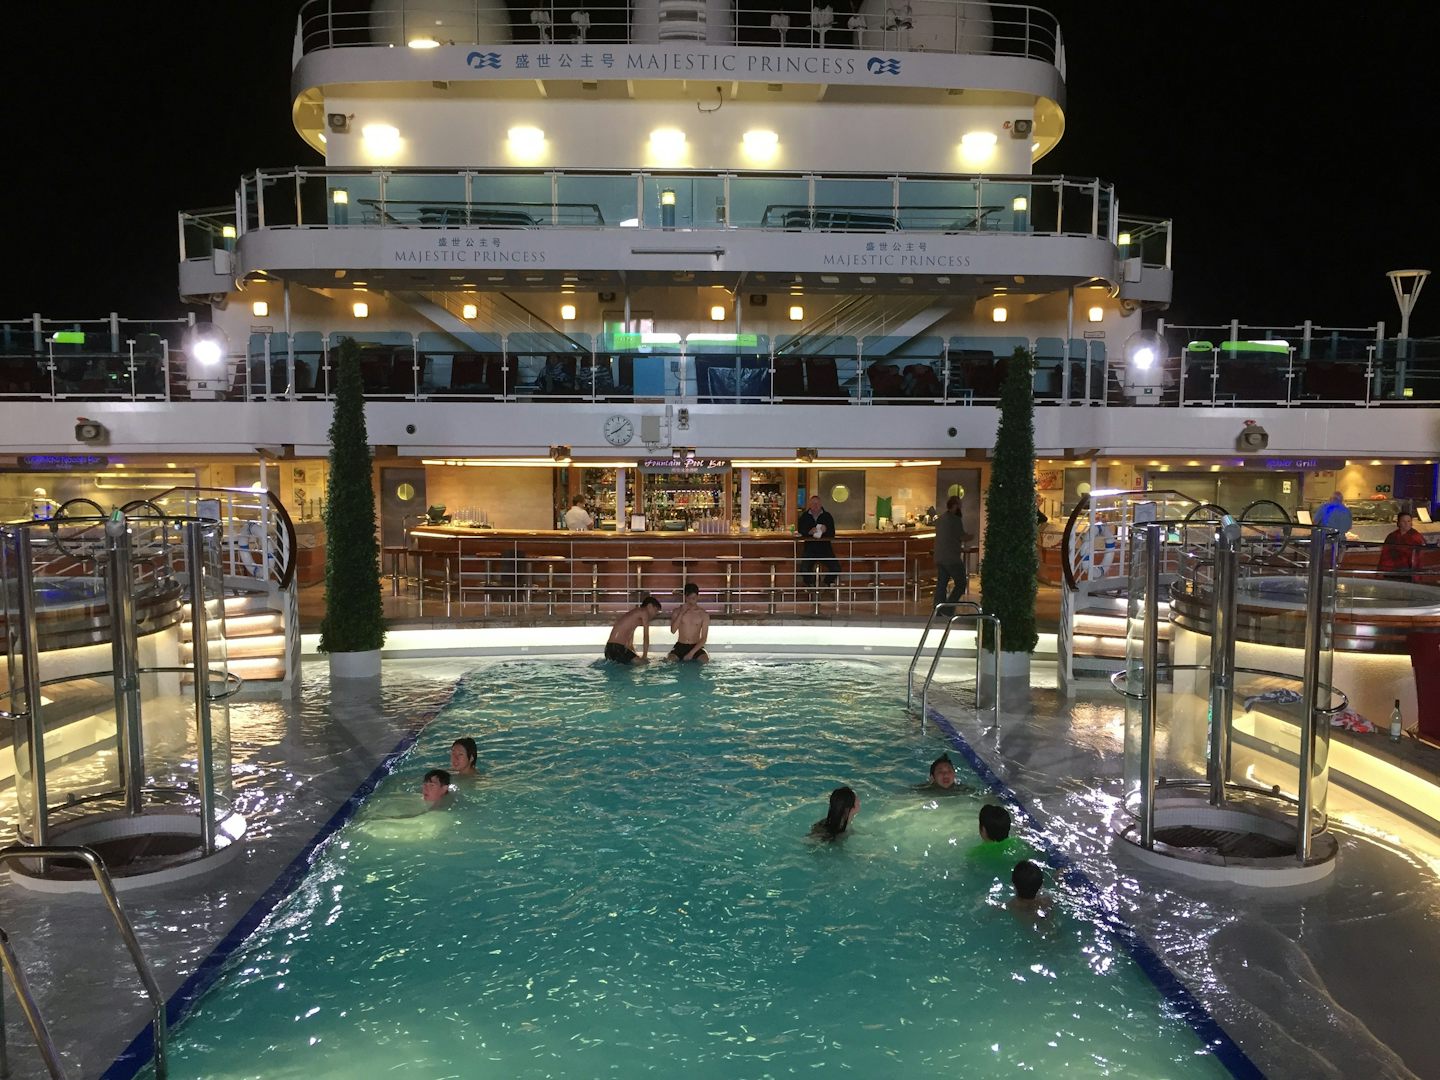 View of the main pool at night